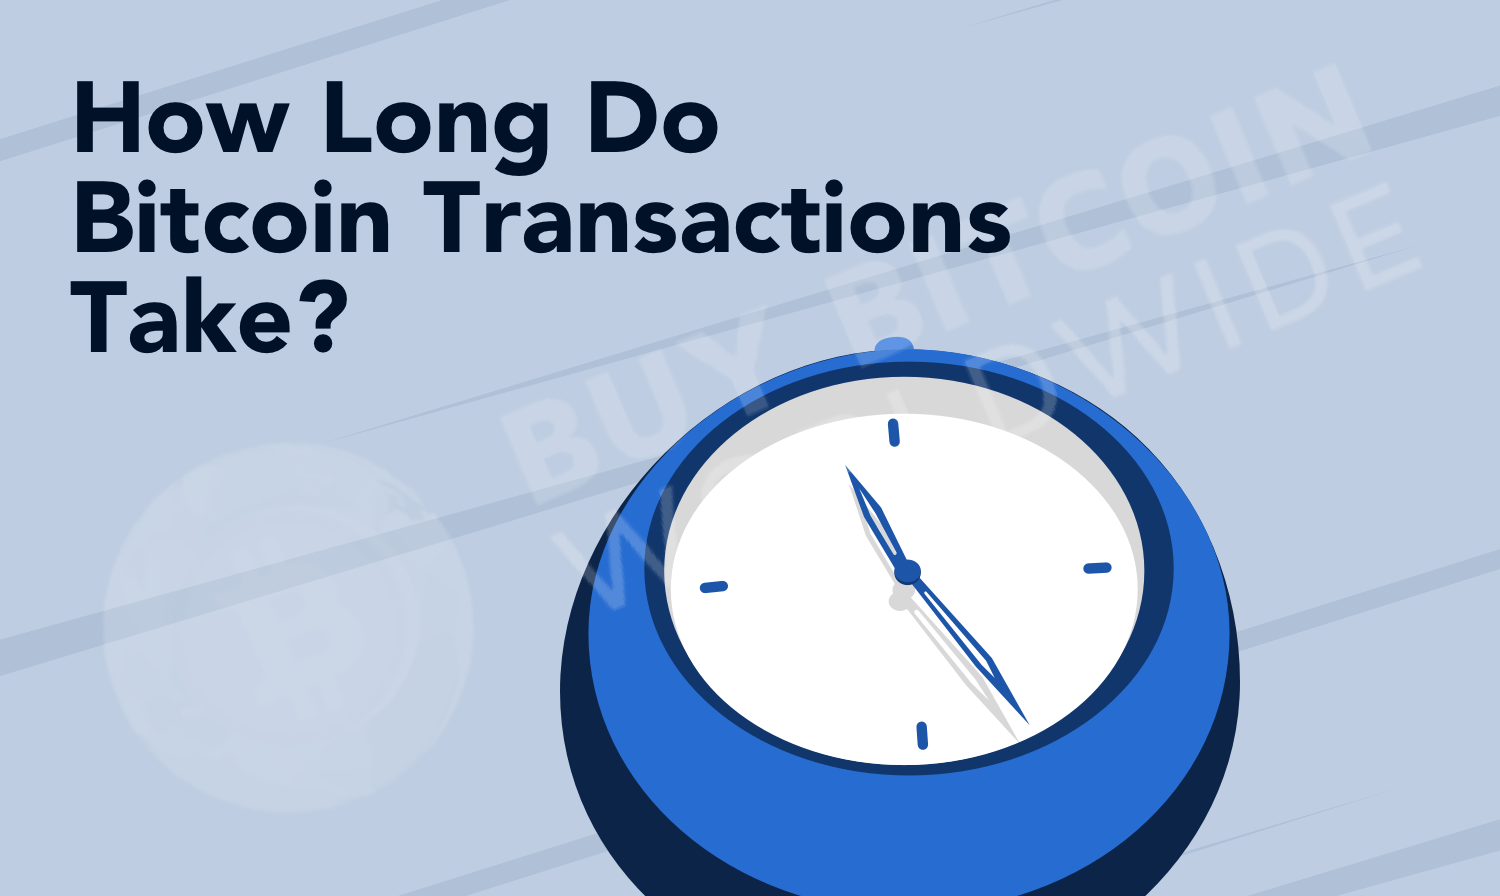 How Long Does Verification for Bitcoin Transactions Take?